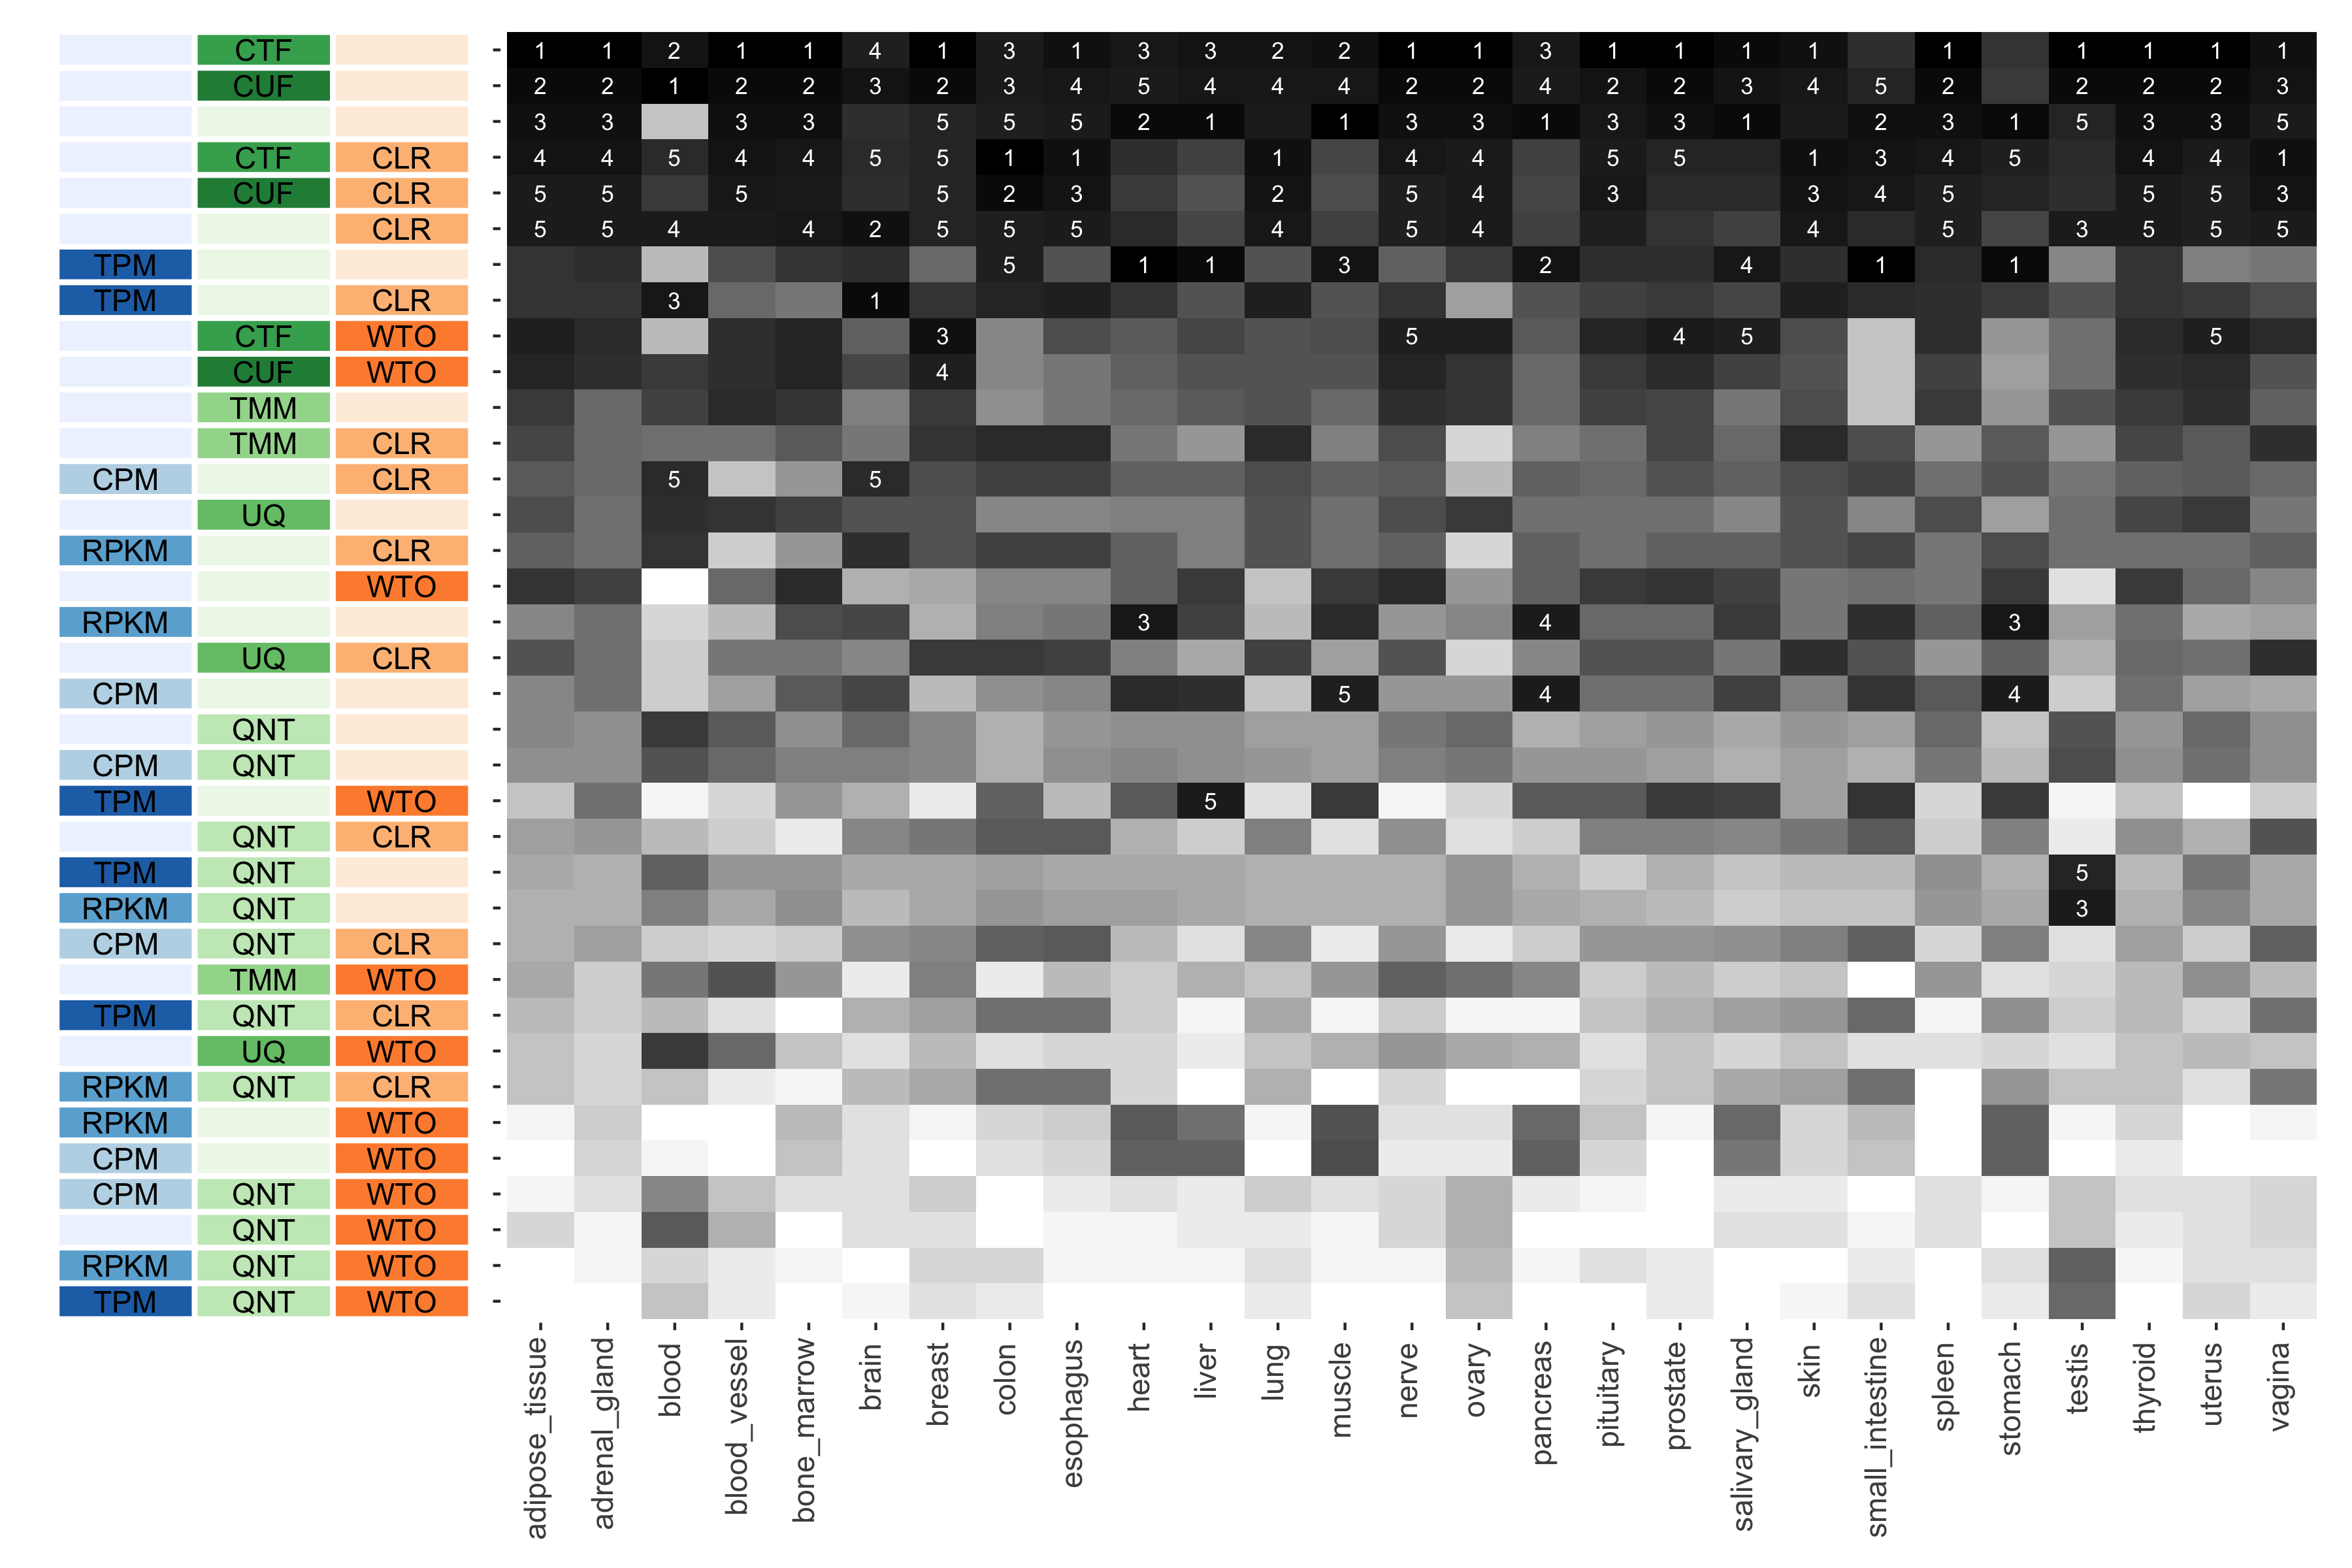 The heatmap shows the number of times (cell color) each workflow (row) outperforms other workflows in different tissues (columns), when the resulting coexpression networks are evaluated based on the tissue-naive gold standard. The darkest colors indicate workflows that are significantly better than the most other workflows. In addition, the top 5 workflows in each column are marked with their rank, with ties given minimum rank.